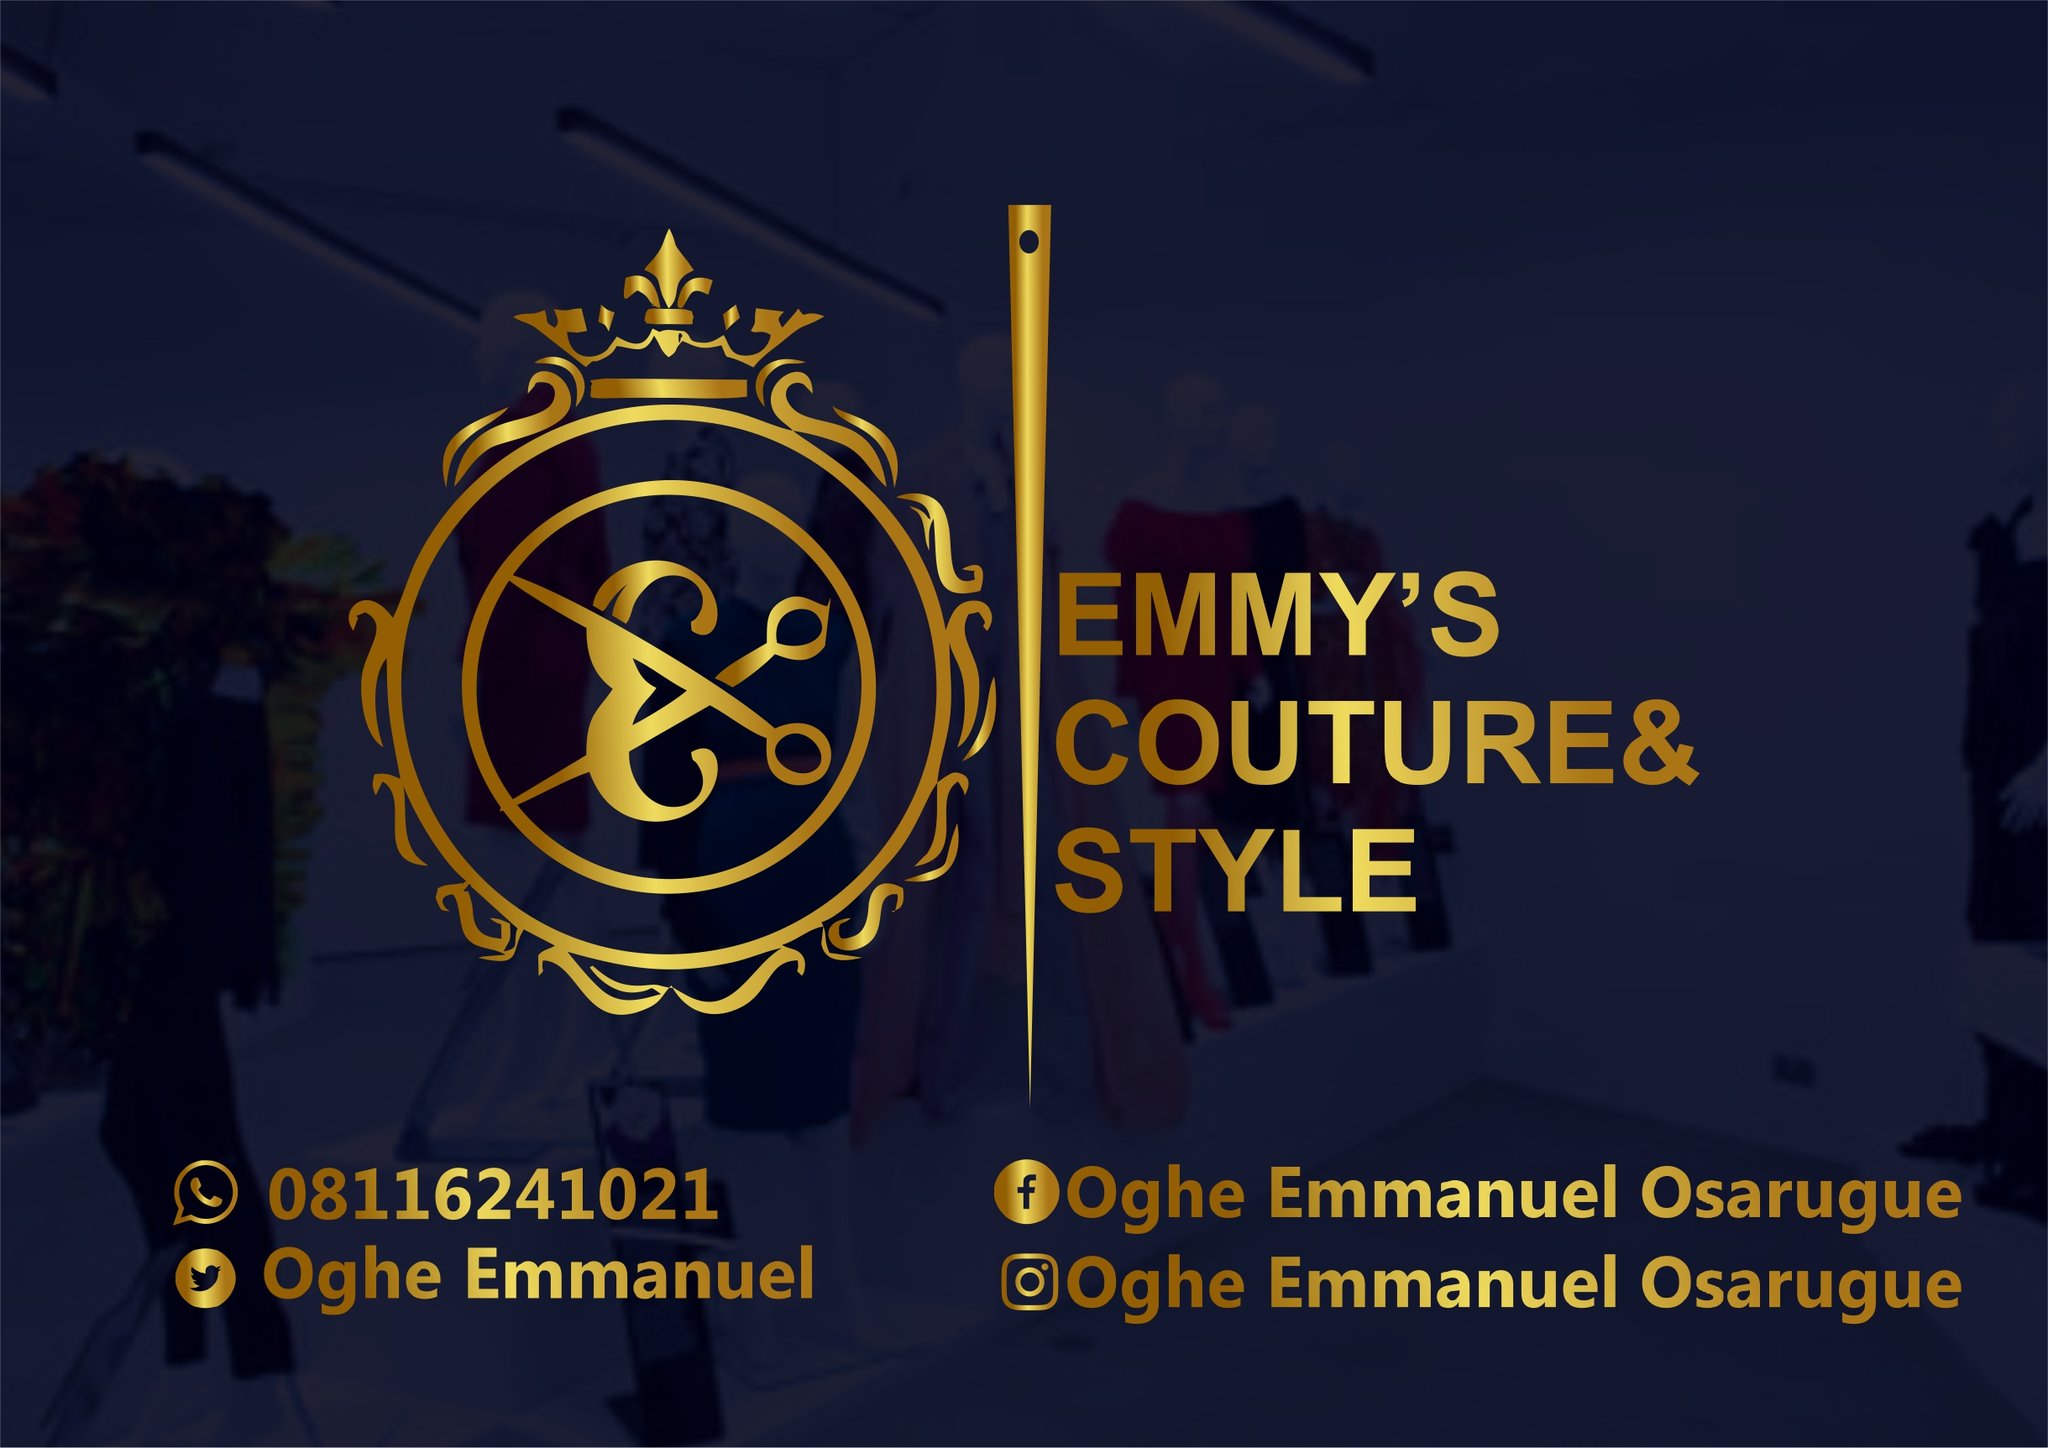 EMMYS COUTURE & STYLE provider